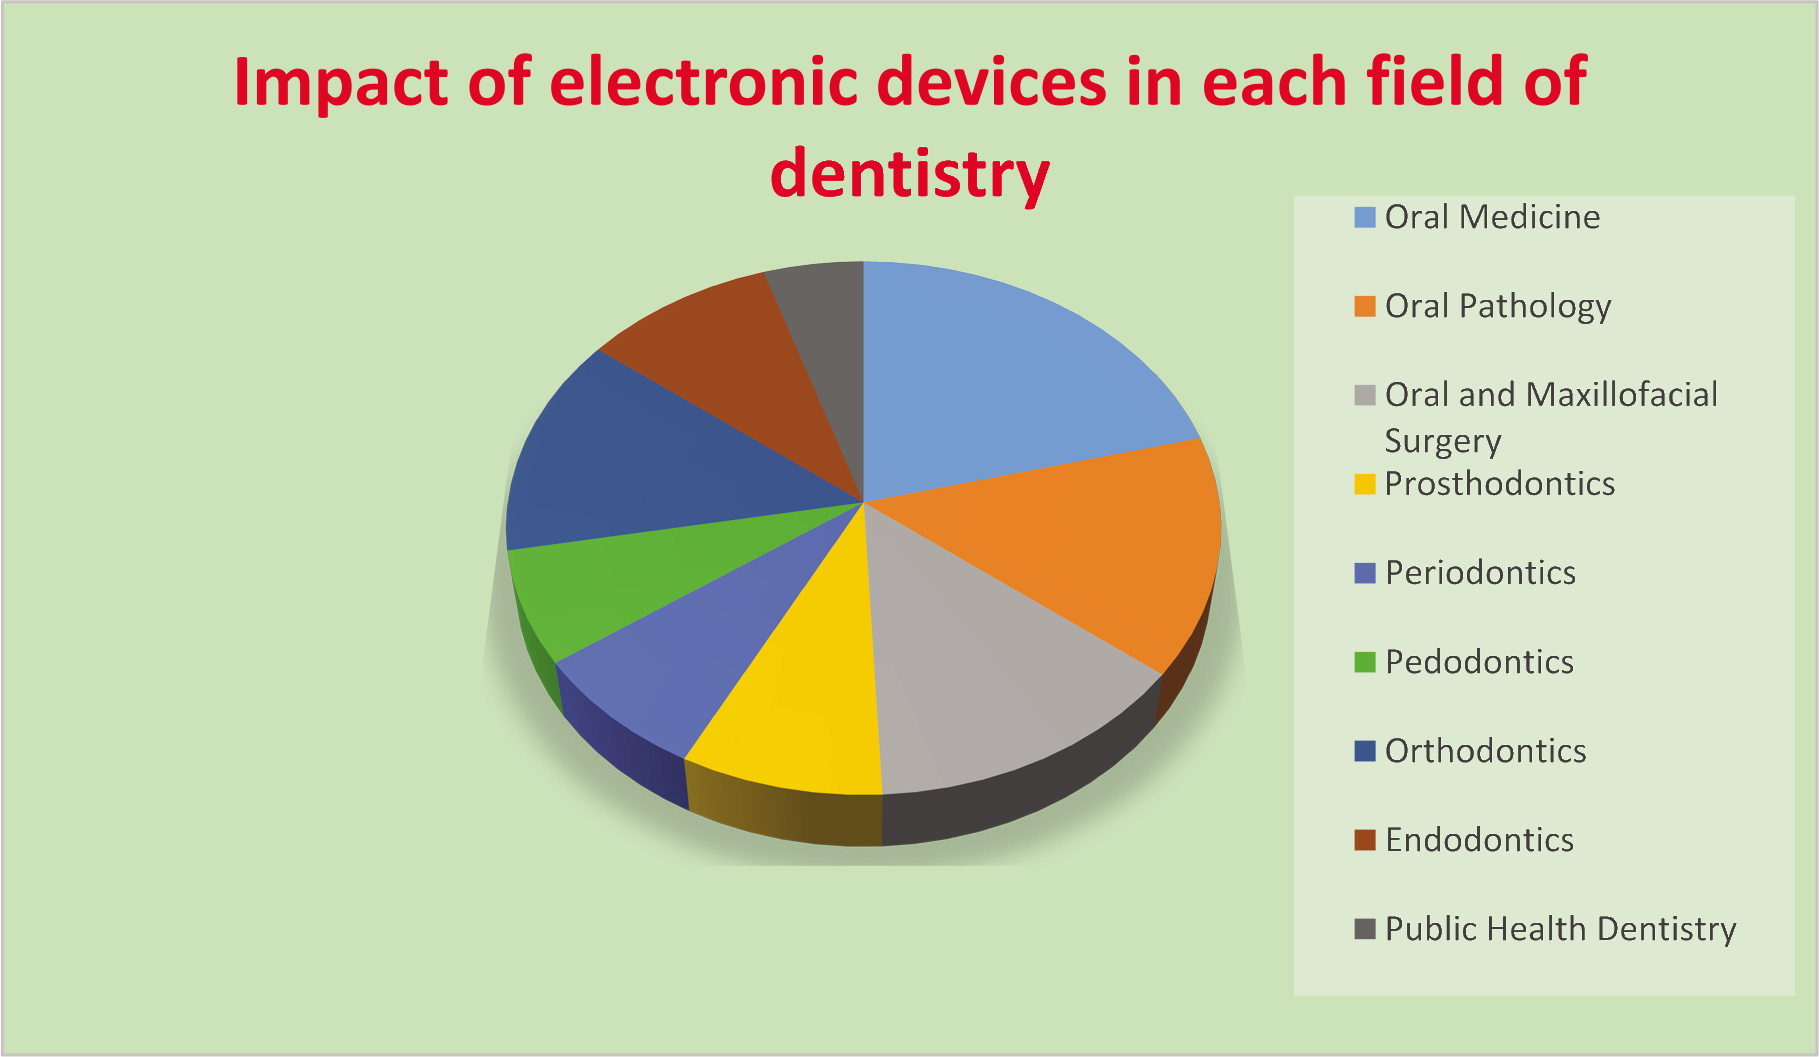 Impact of dentistry in each speciality of dentistry.